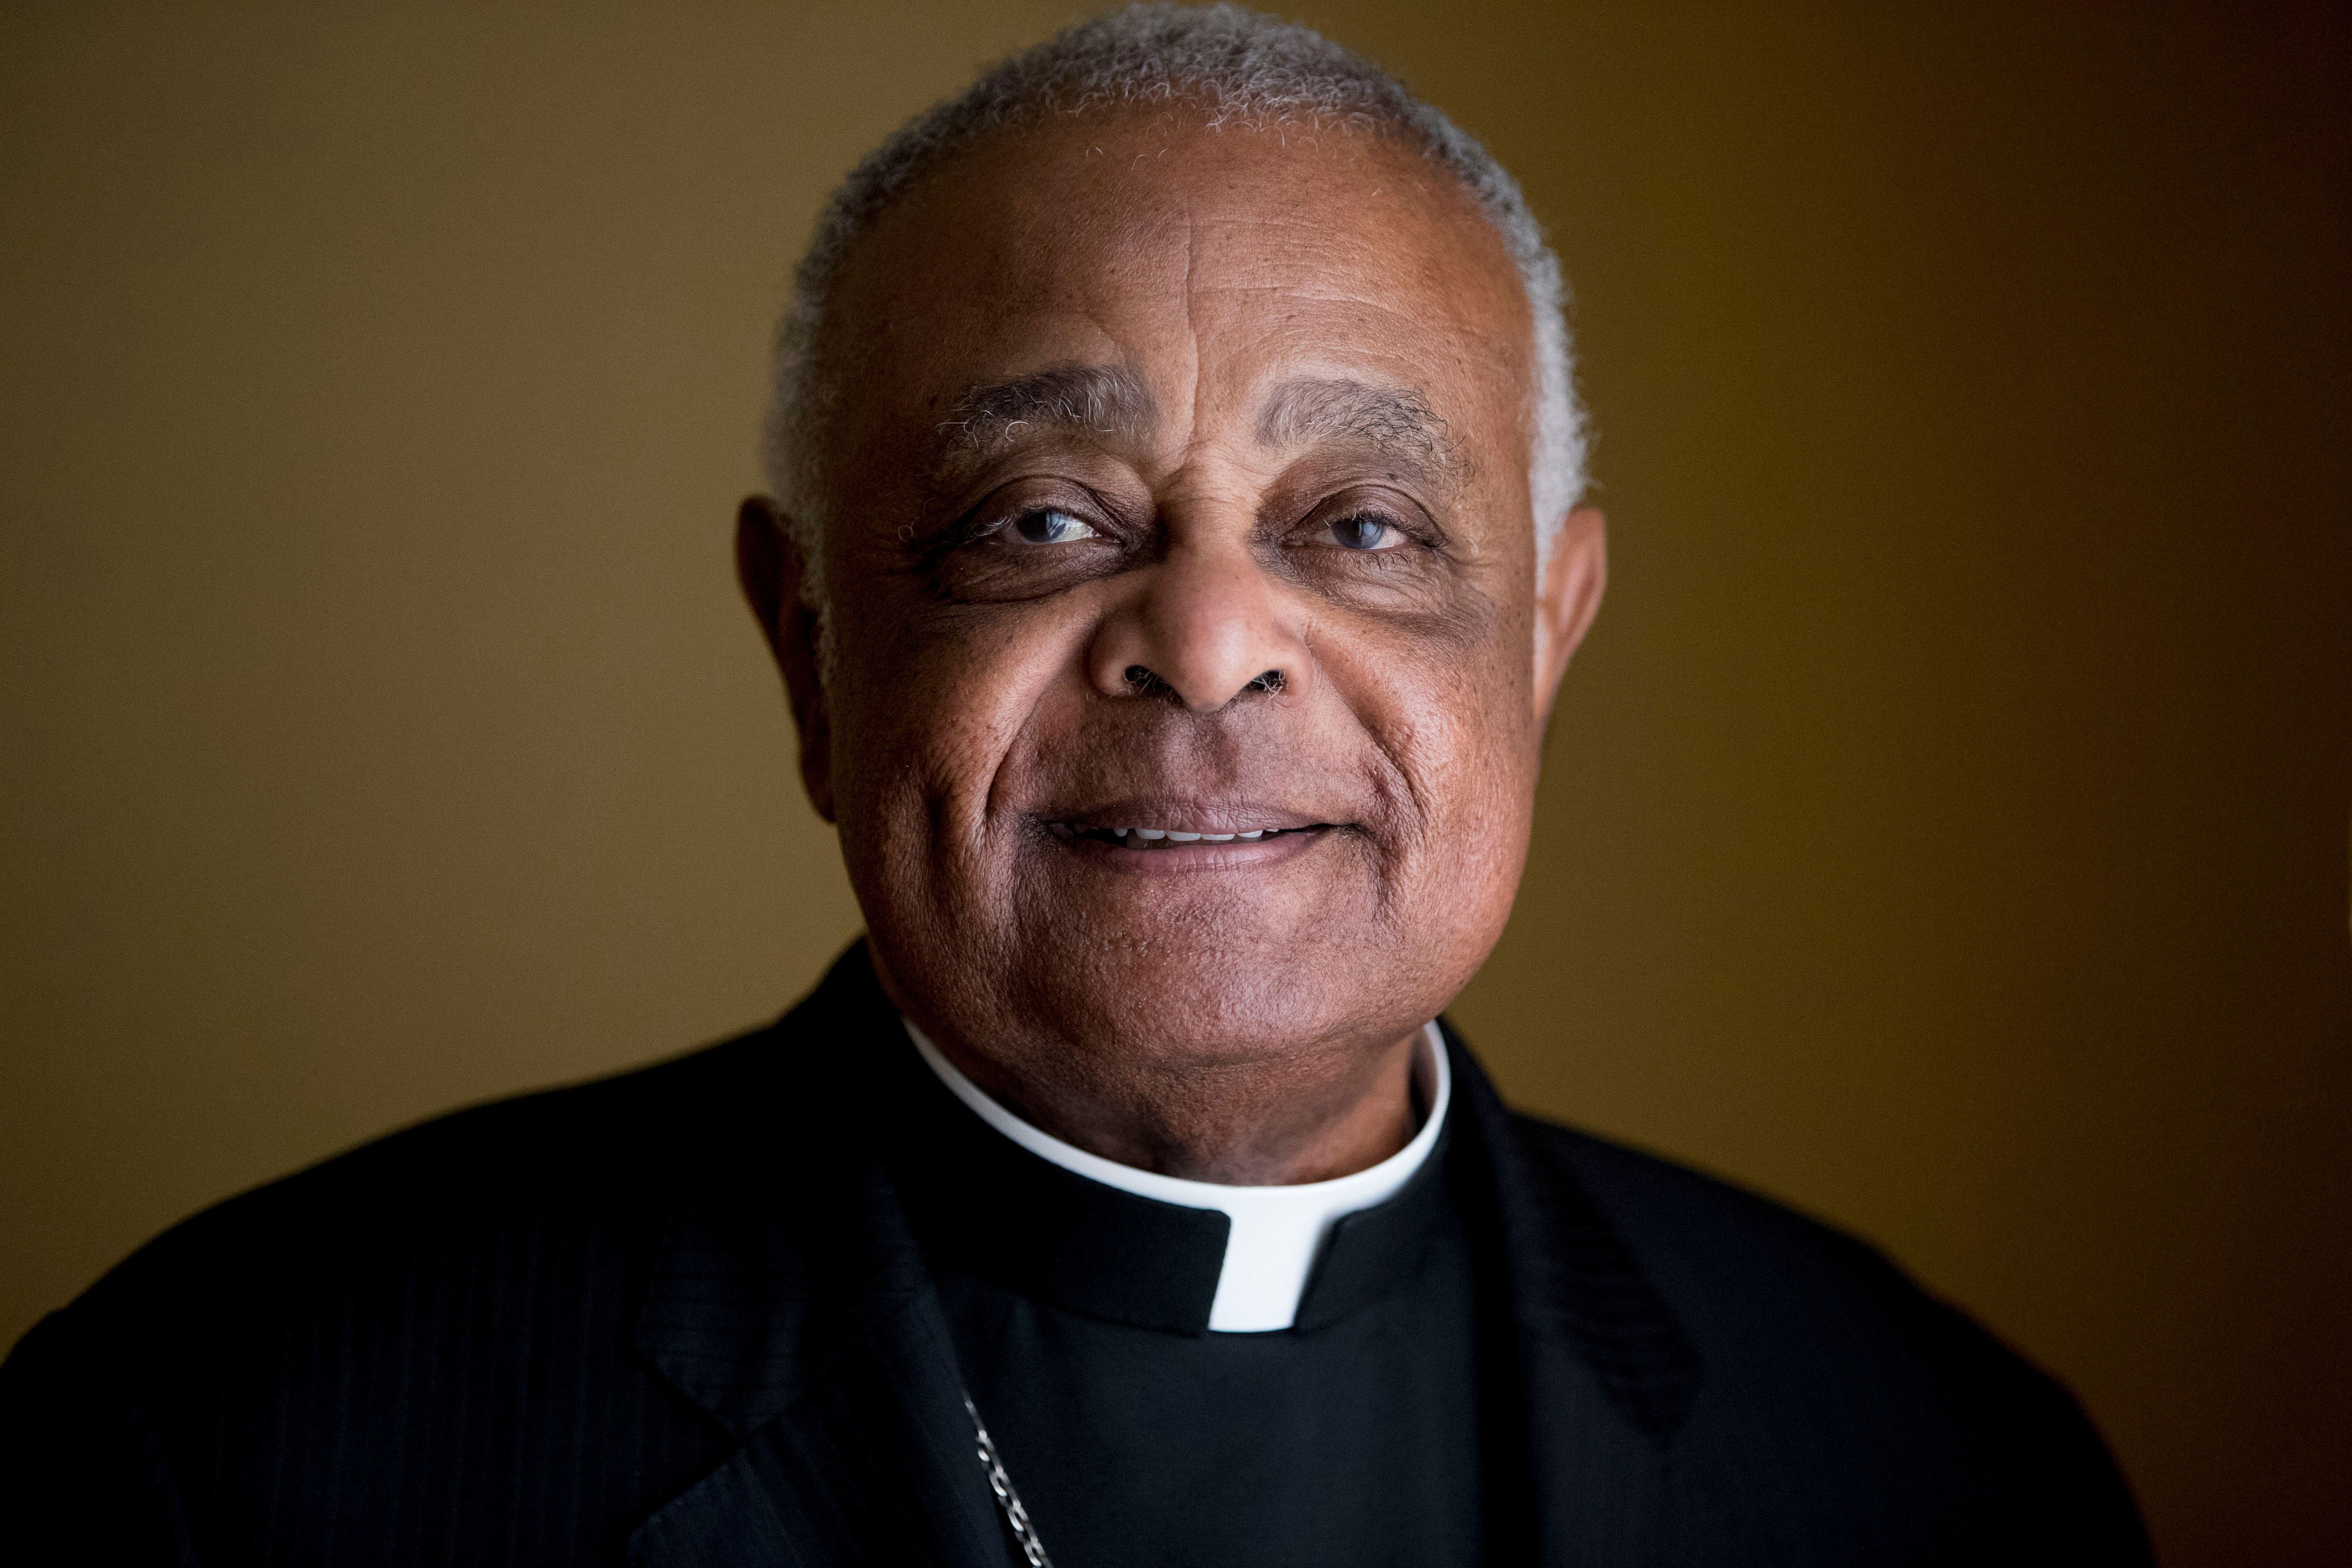 <p>In November 2020, Archbishop Wilton Gregory of Washington, D.C. -- already the highest ranking Black Catholic in U.S. history -- became the Catholic Church's first African American cardinal. As such, he'll became one of Pope Francis's closest advisers and one of about 120 men who will someday elect the faith's next pontiff. "It's been a time to thank God for this unique moment in my life and in the life of the church in the United States," he told CNN. "I hope it's a sign to the African American community that the Catholic Church has a great reverence, respect and esteem for the people, for my people of color."</p>